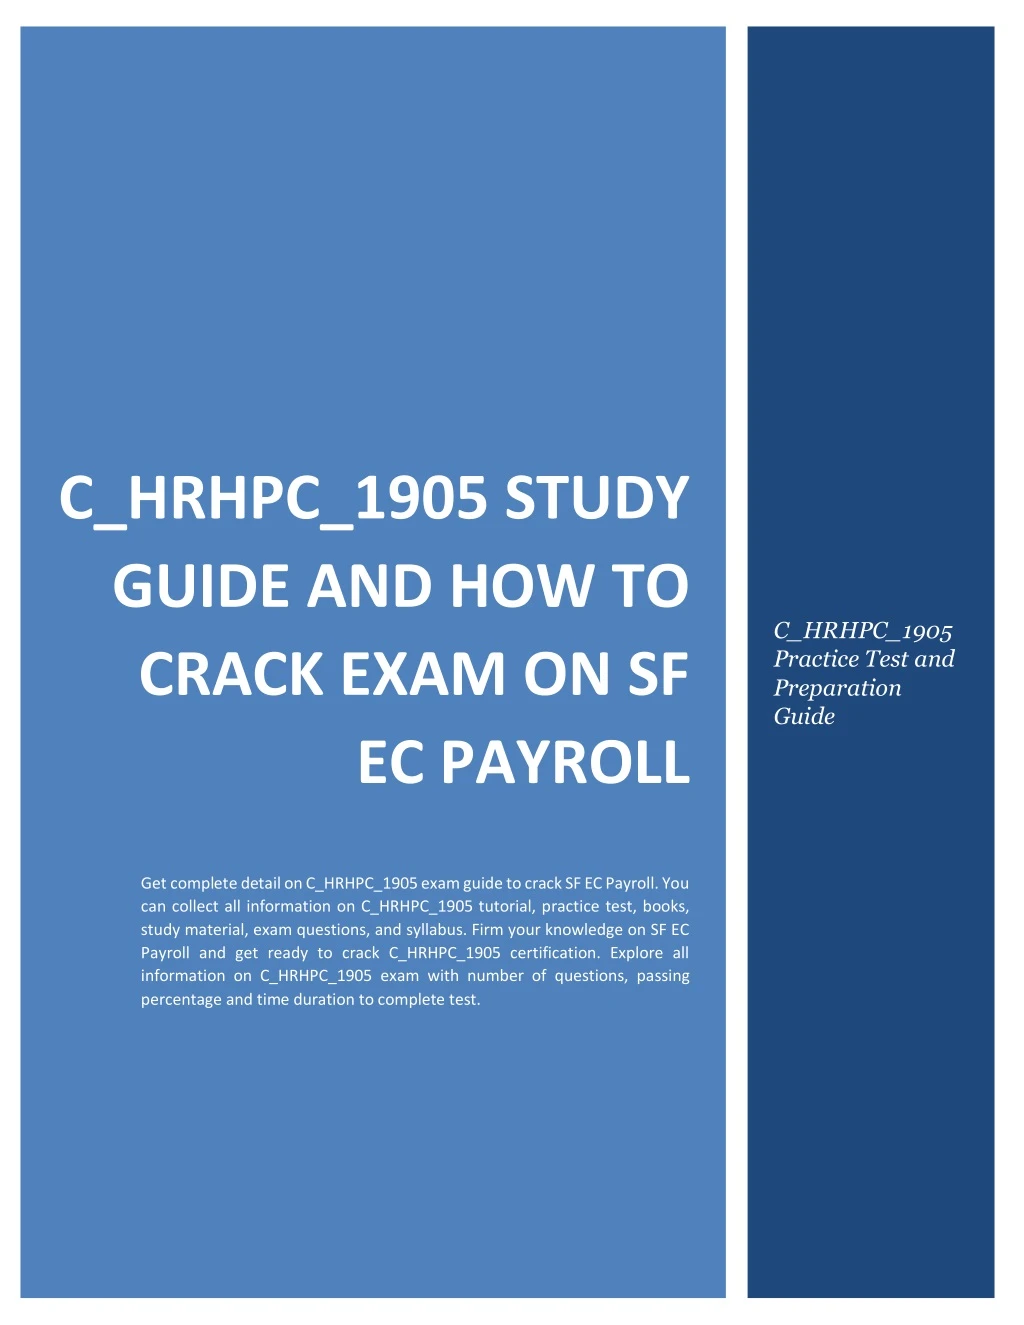 c hrhpc 1905 study guide and how to crack exam